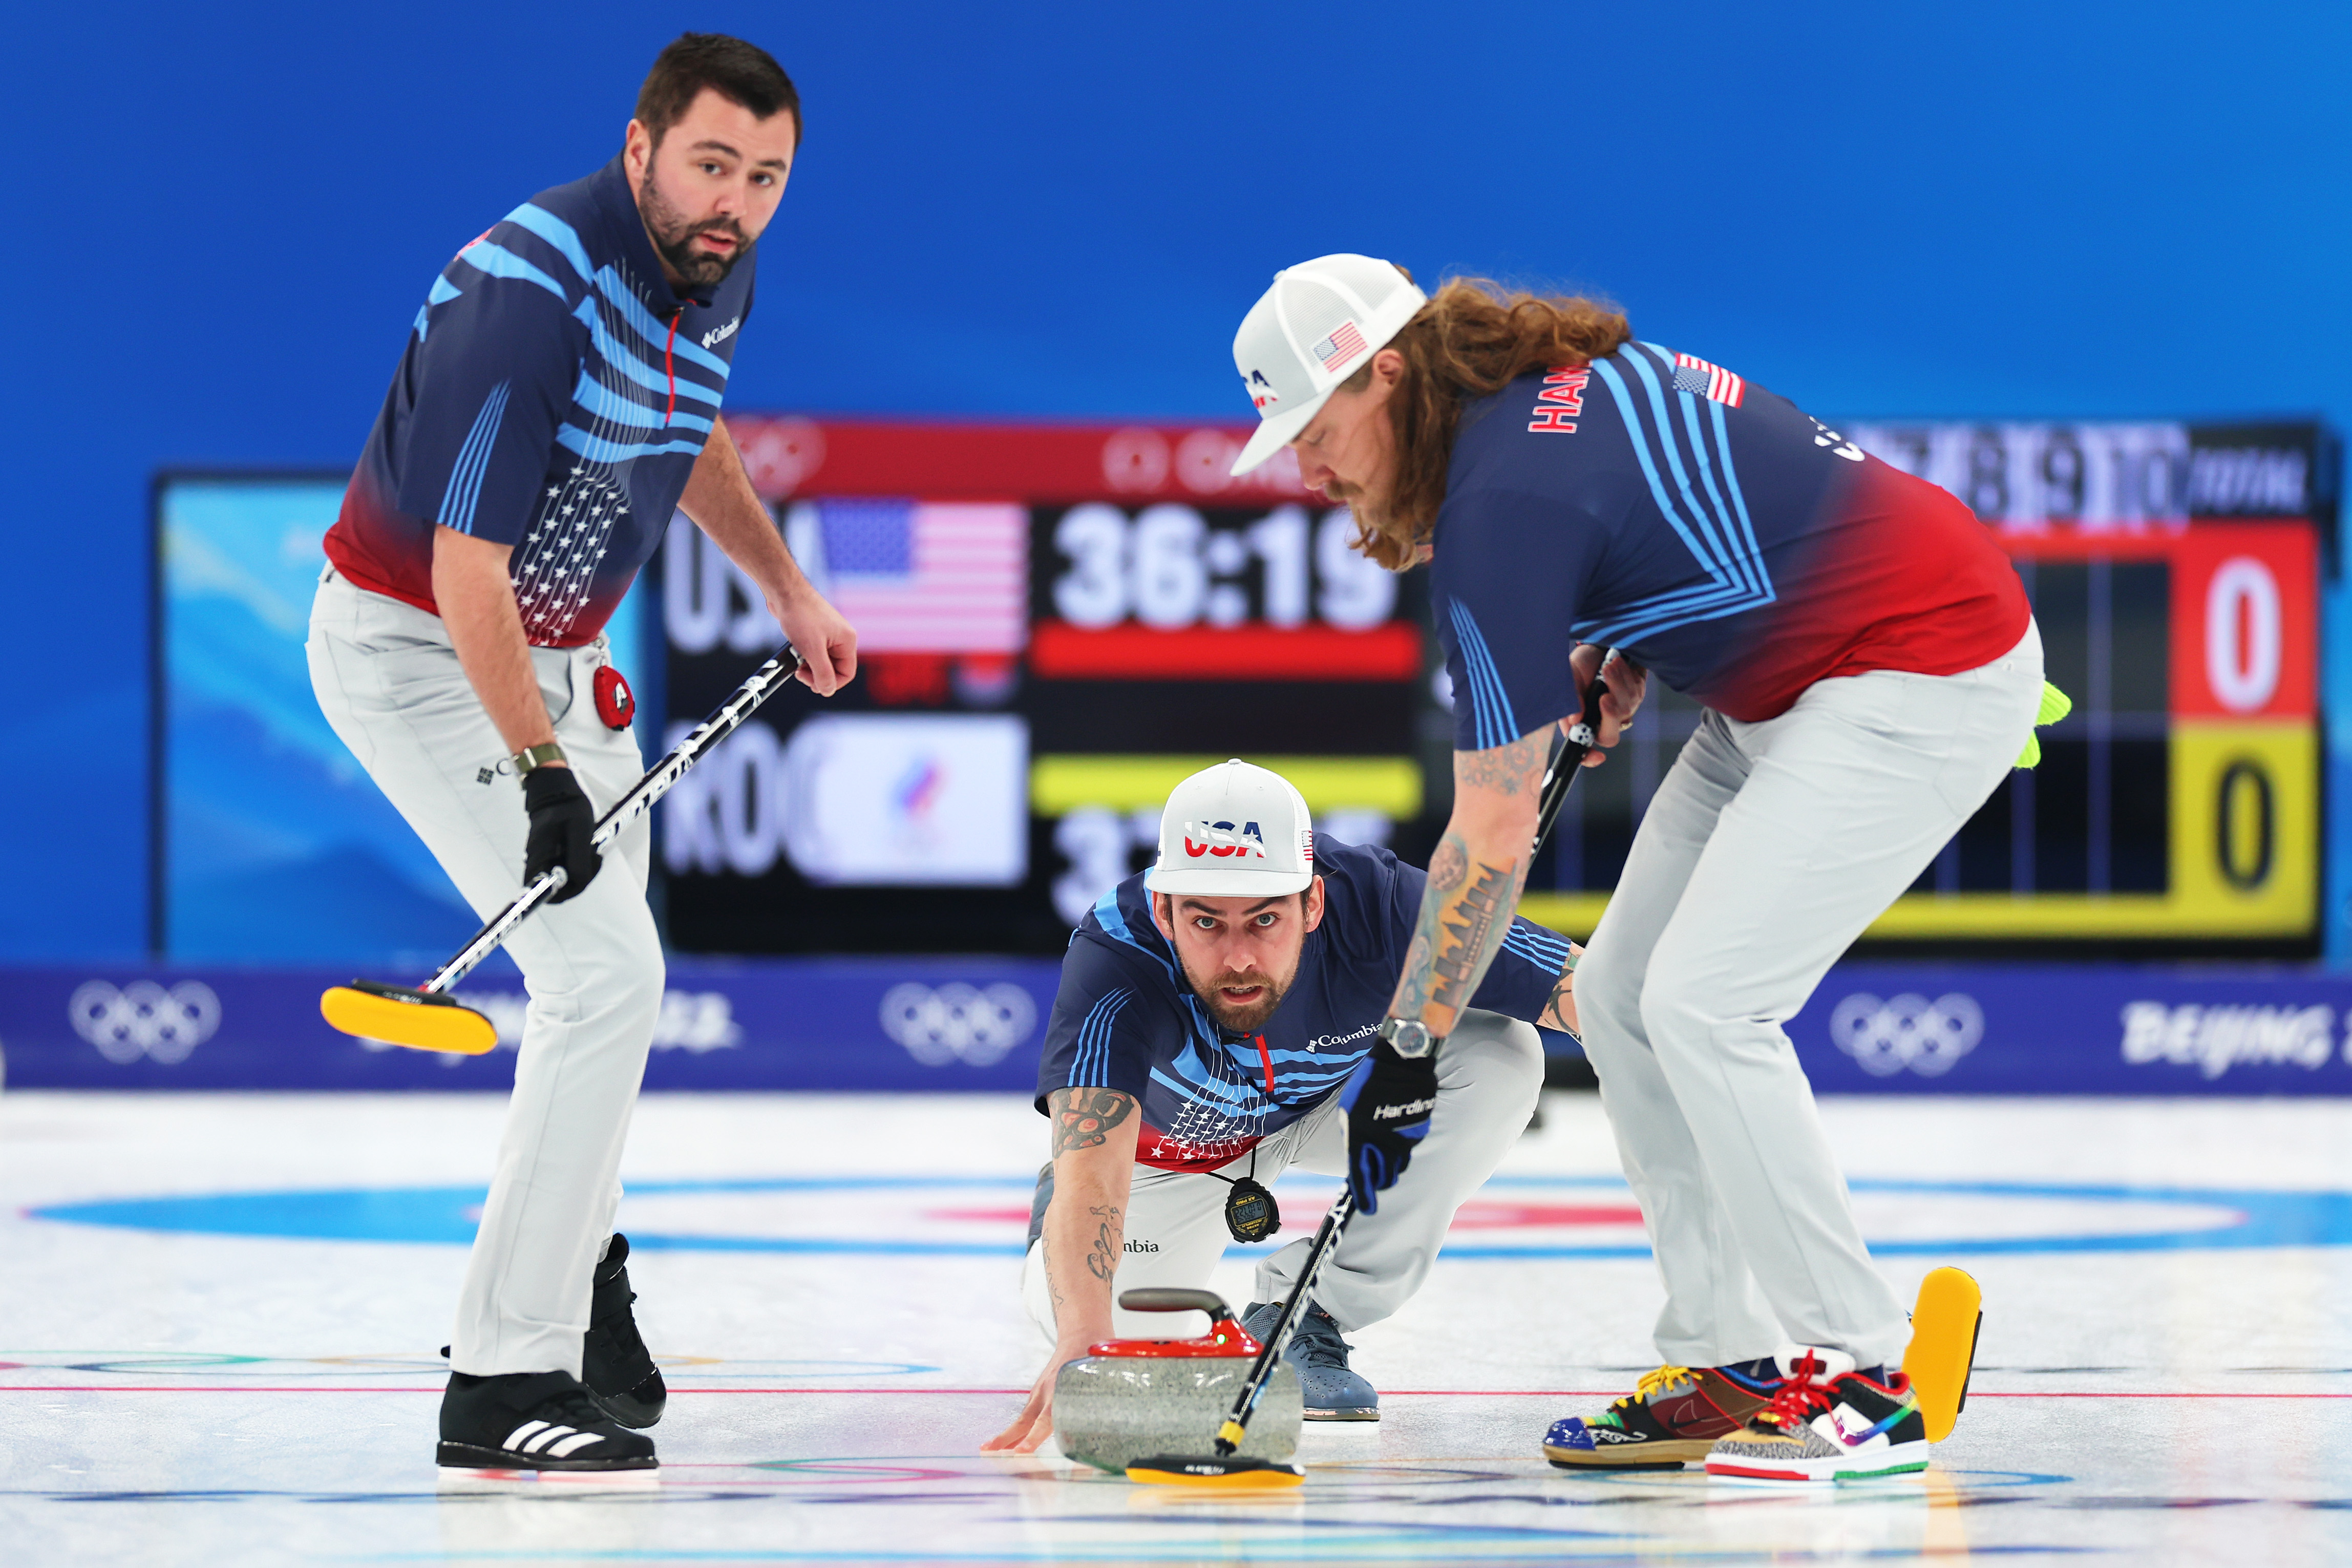 What You Need to Know About Curling